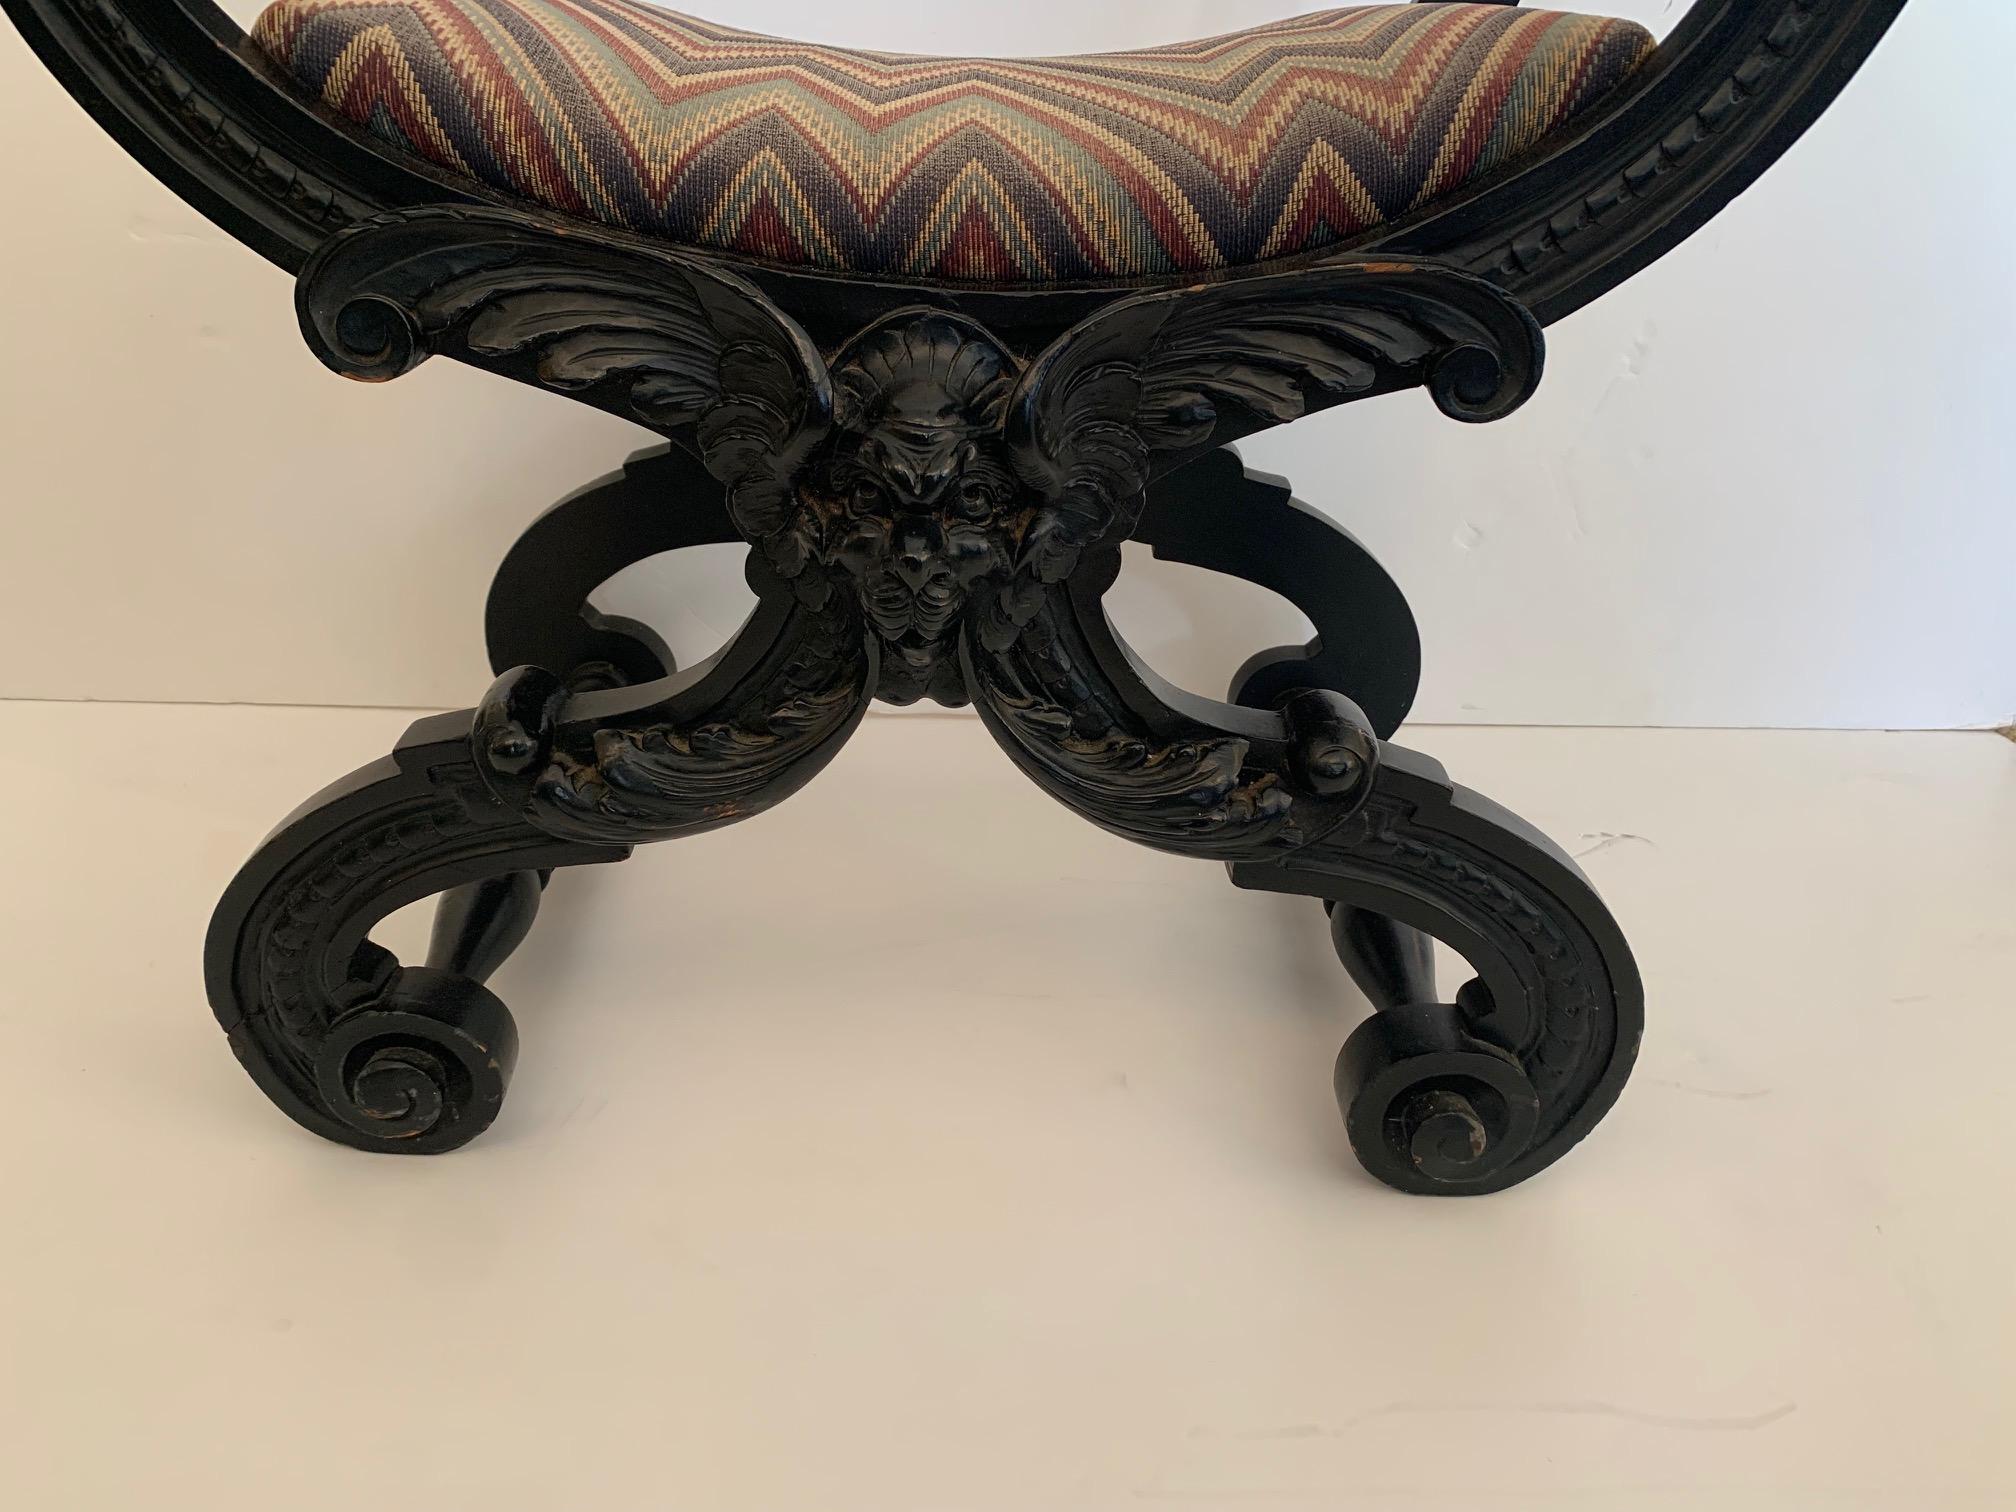 American Stunning Antique Carved Wood Ebonized Throne Style Desk Chair For Sale